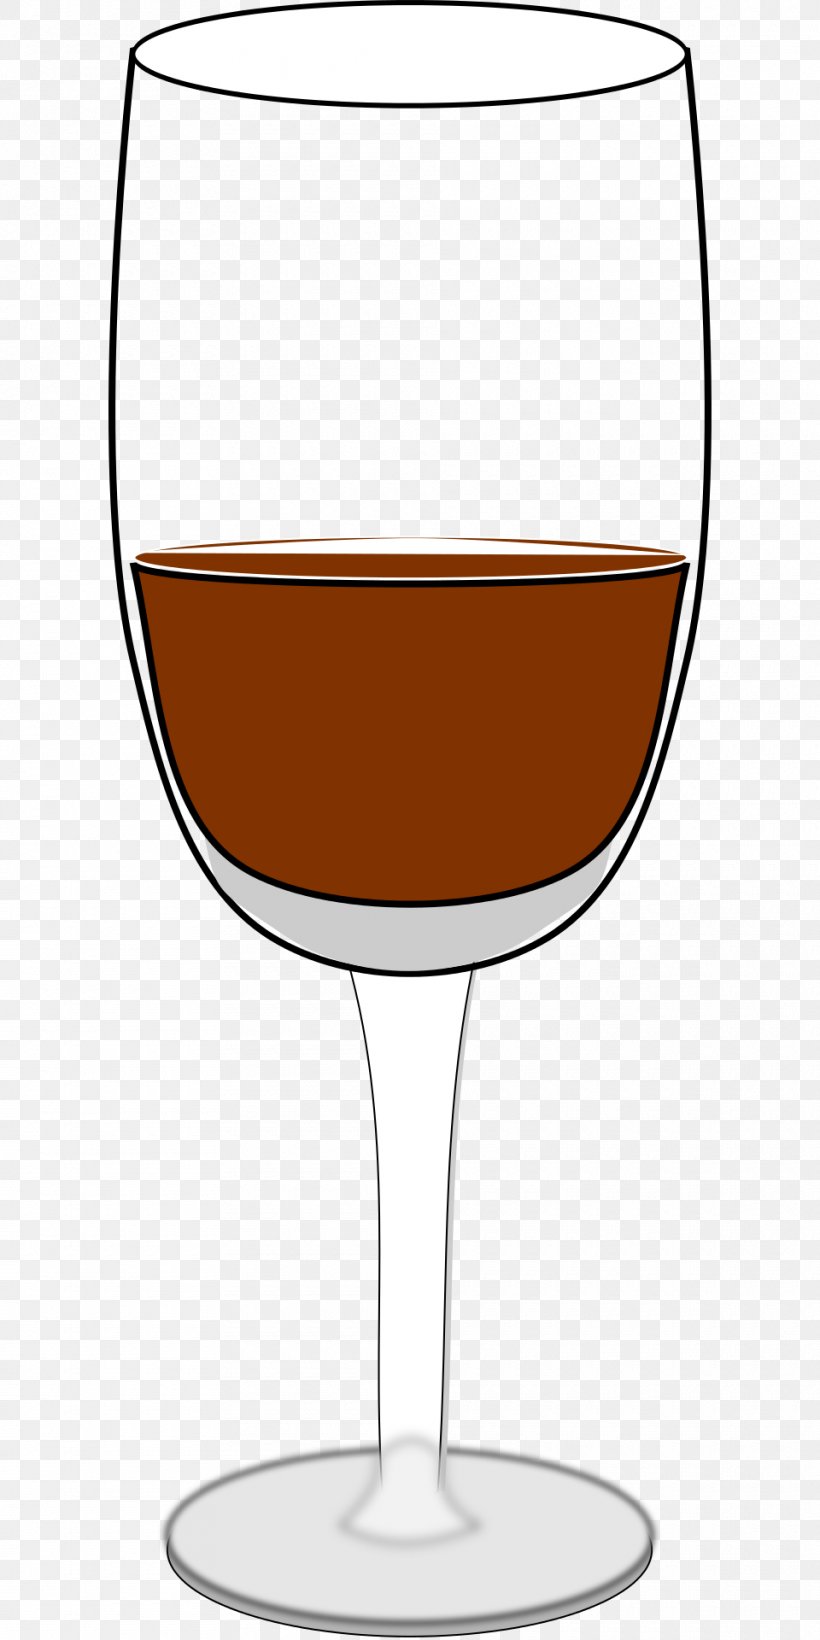 Wine Glass Drink Champagne Glass, PNG, 960x1920px, Glass, Alcoholic Drink, Beer Glass, Beer Glasses, Champagne Glass Download Free